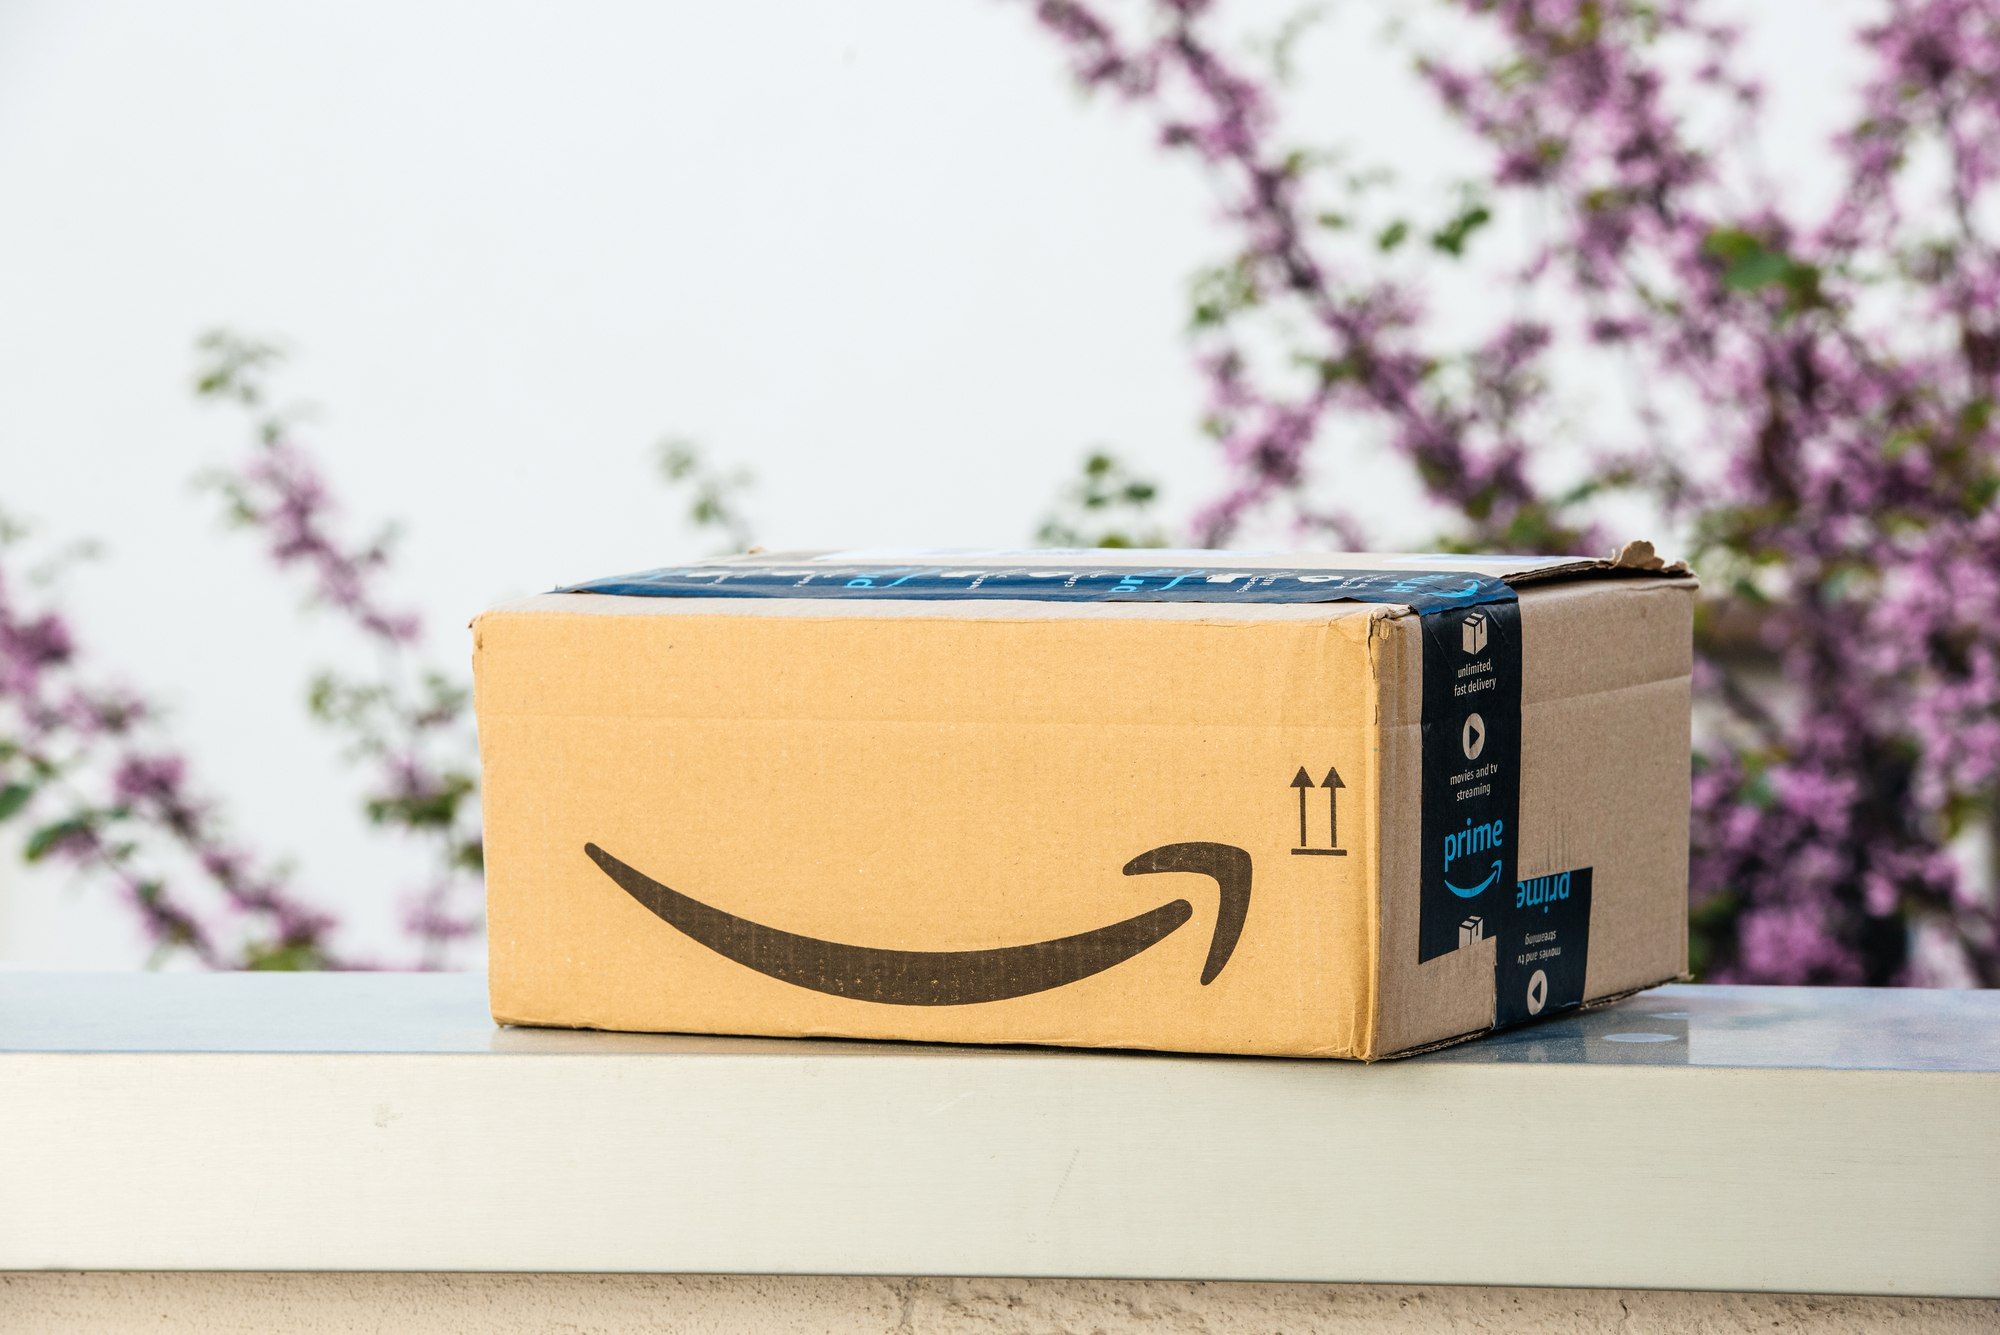 Class action accuses Amazon, publishers of price-fixing books